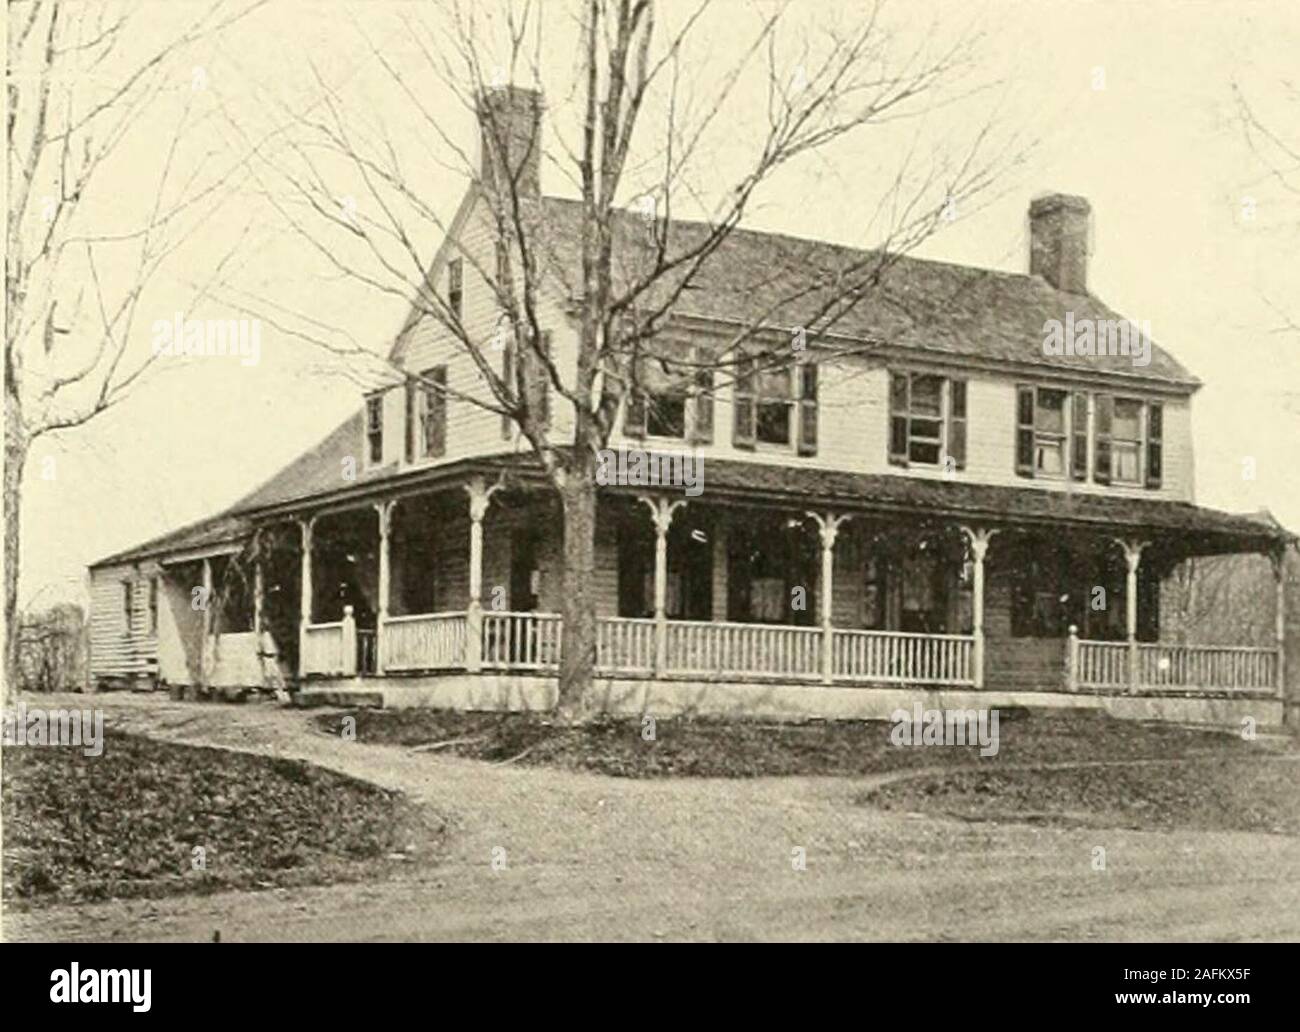 . Farmington, Connecticut, the village of beautiful homes. ly deplored1&gt; (iov. Treadwell years afterwardhad already set in. Samuel Langdon.son of Deacon Langdon. removing toXorthampton and carrying thither theluxurious h.cbits of his native village,was with divers persons presented bythe gr.nid jiirv to the court at Xortii-ampton, March .(x 167(1, for wearing ofsilk, and that in a flaunting manner, andothers for long hair and other extrava-gances contrary to honest and soberorder and demeanor, not becoming awilderness state, at least the professiiuiof Cliristi;inily and religion, Mr. L,-in Stock Photo